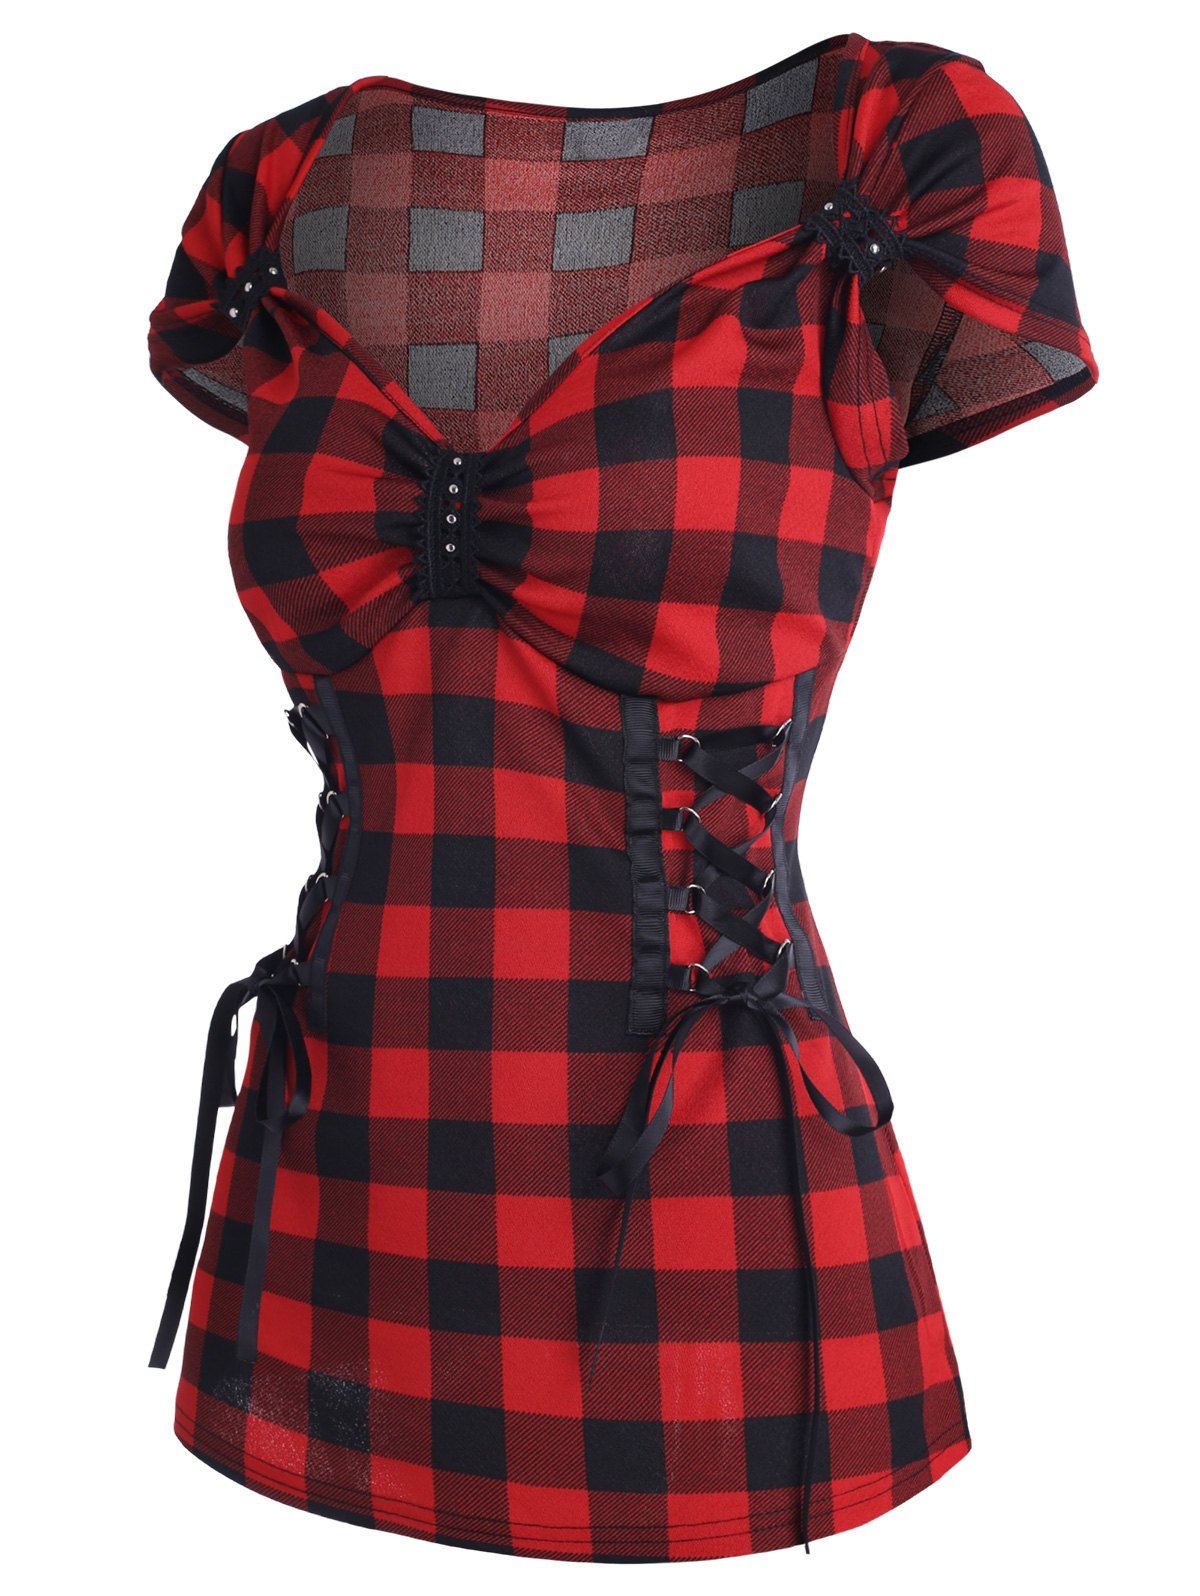 Corset Lace Up T Shirt Sweetheart Neck Plaid Checkerboard Tee - RED L